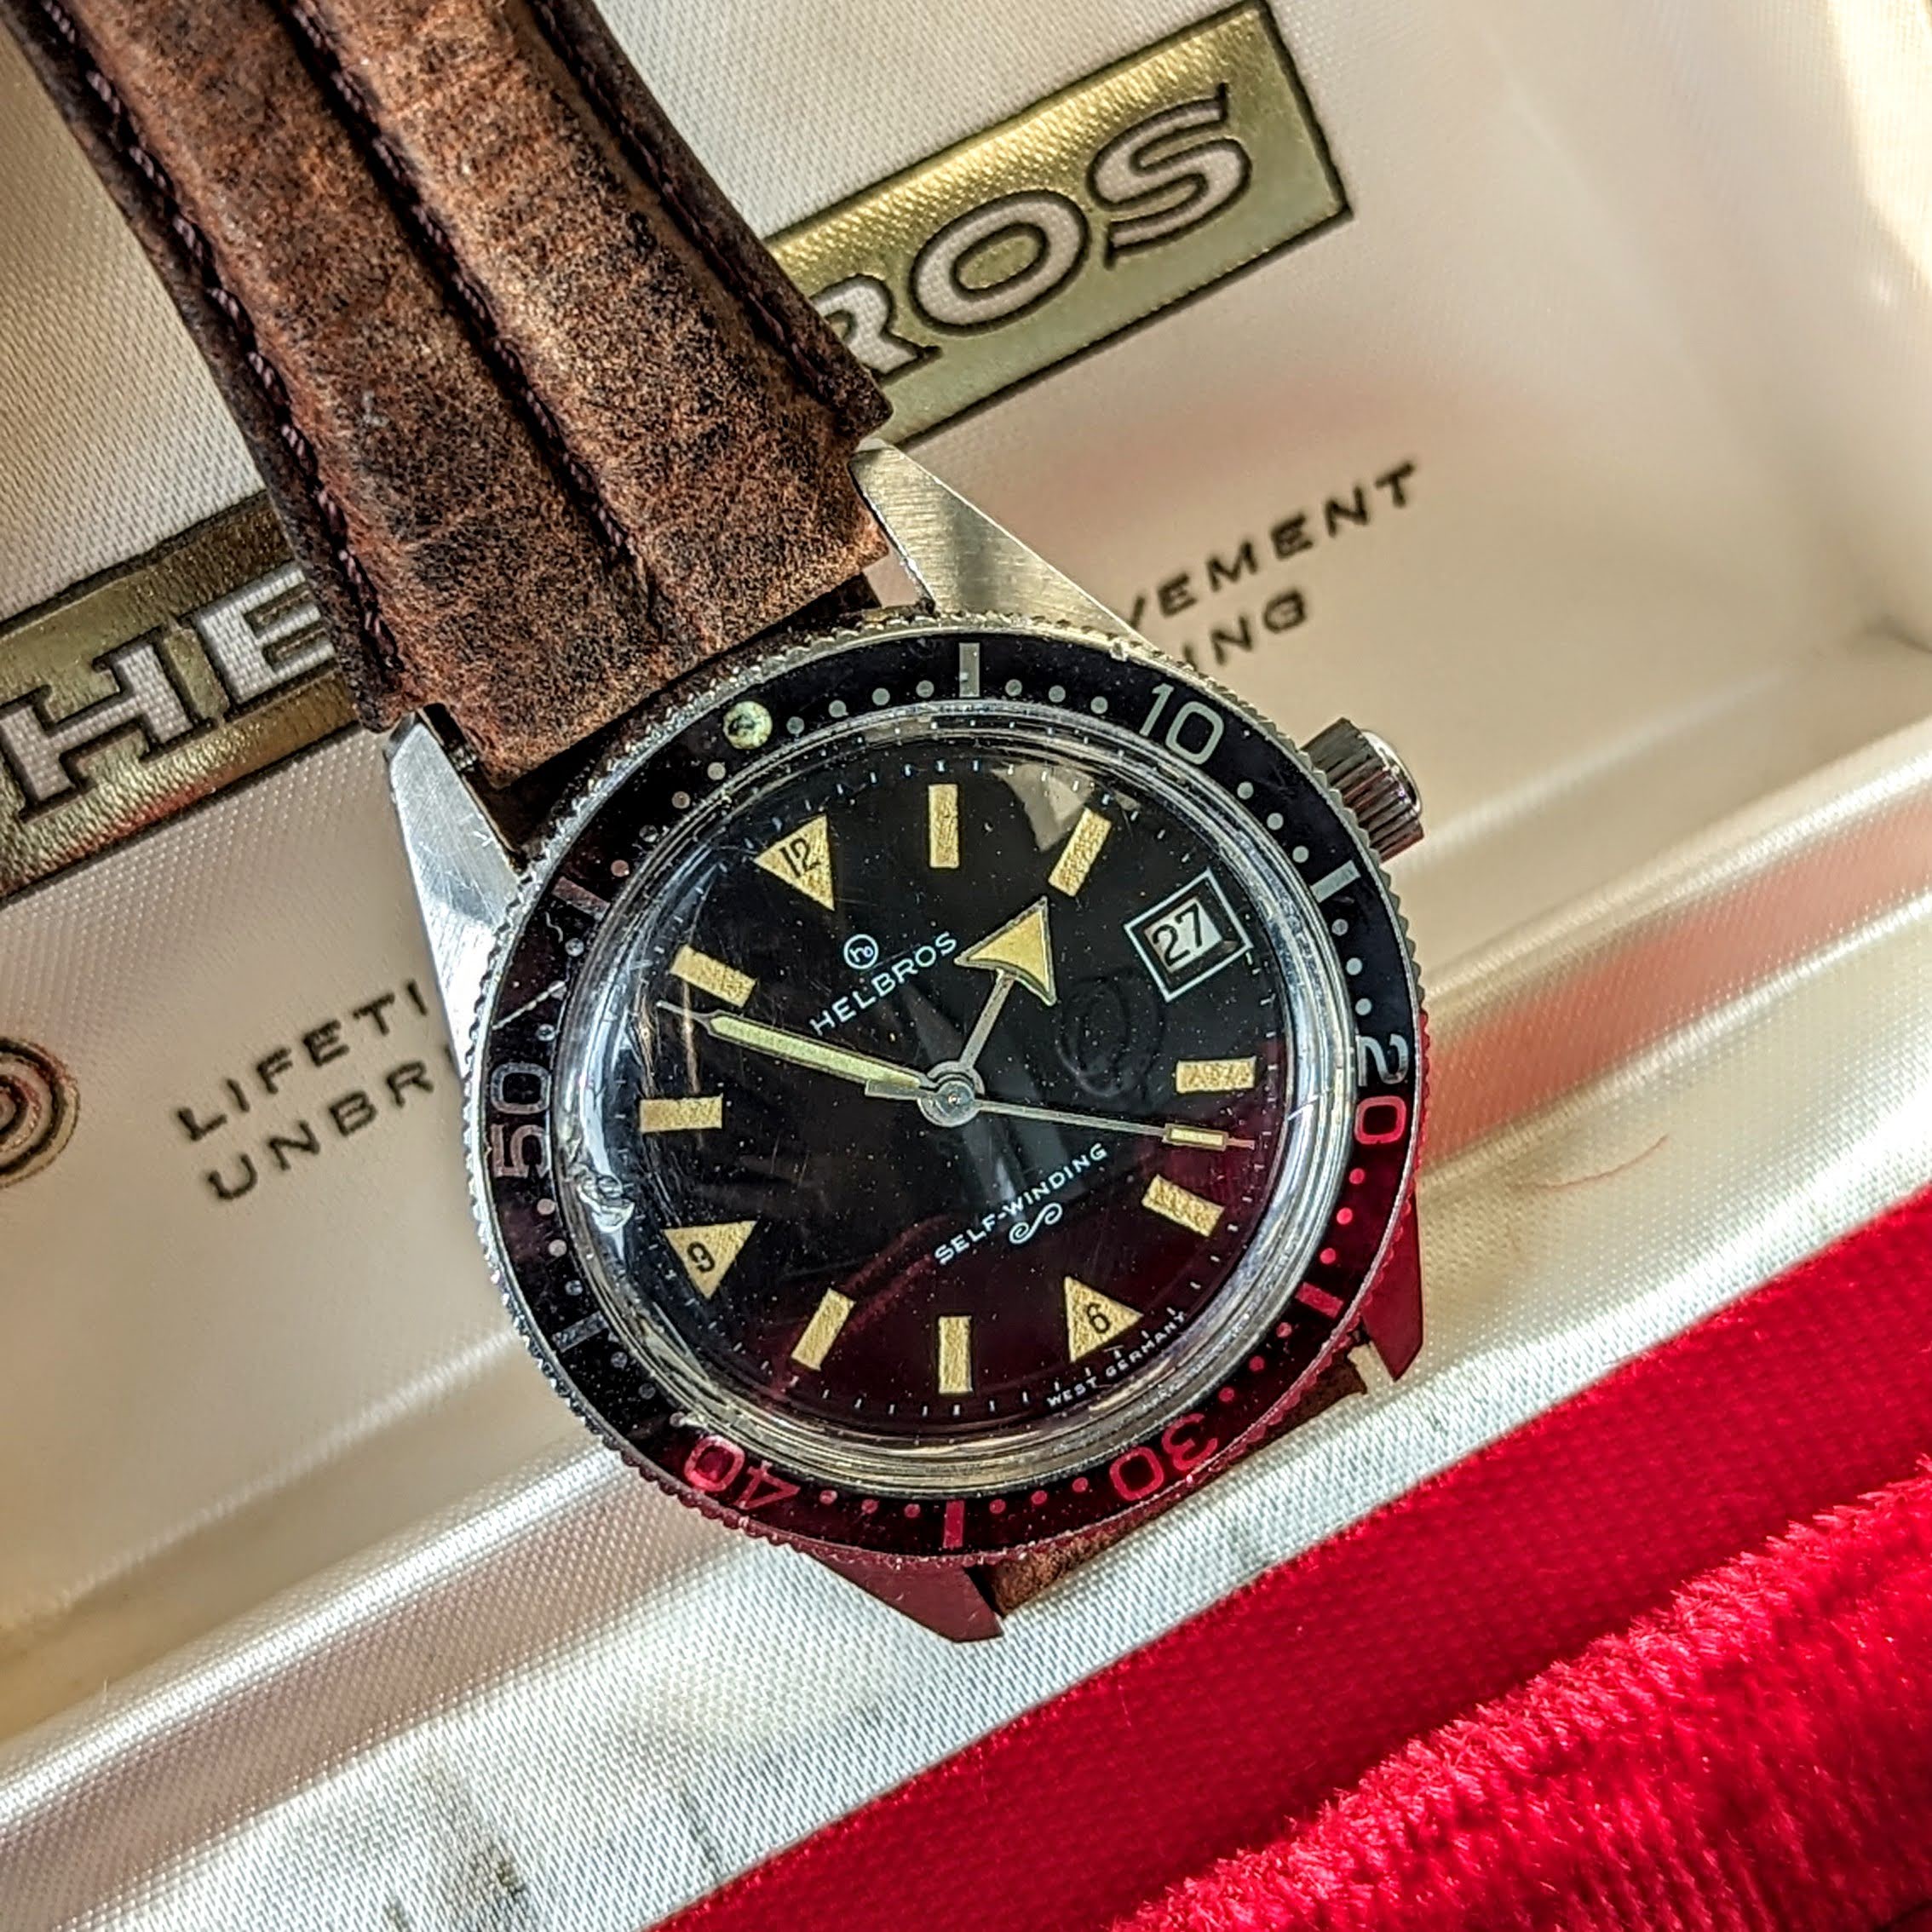 1960s HELBROS Invincible Skin Diver Automatic Wristwatch 17 Jewels Cal. PUW 1461 Germany Made